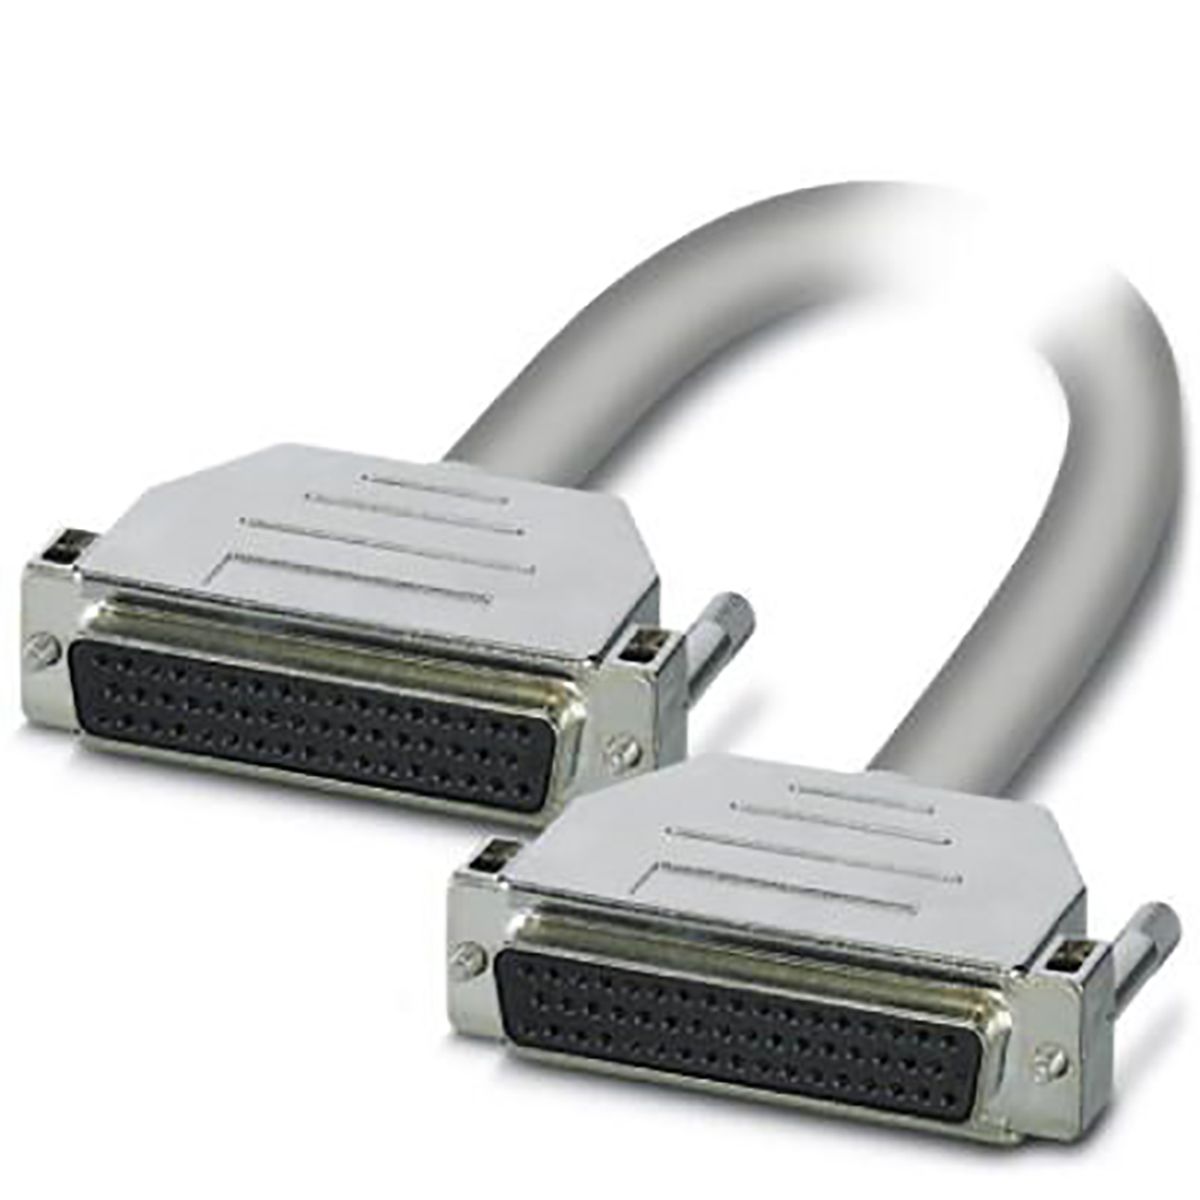 Phoenix Contact 3m 50 pin D-sub to 50 pin D-sub Serial Cable